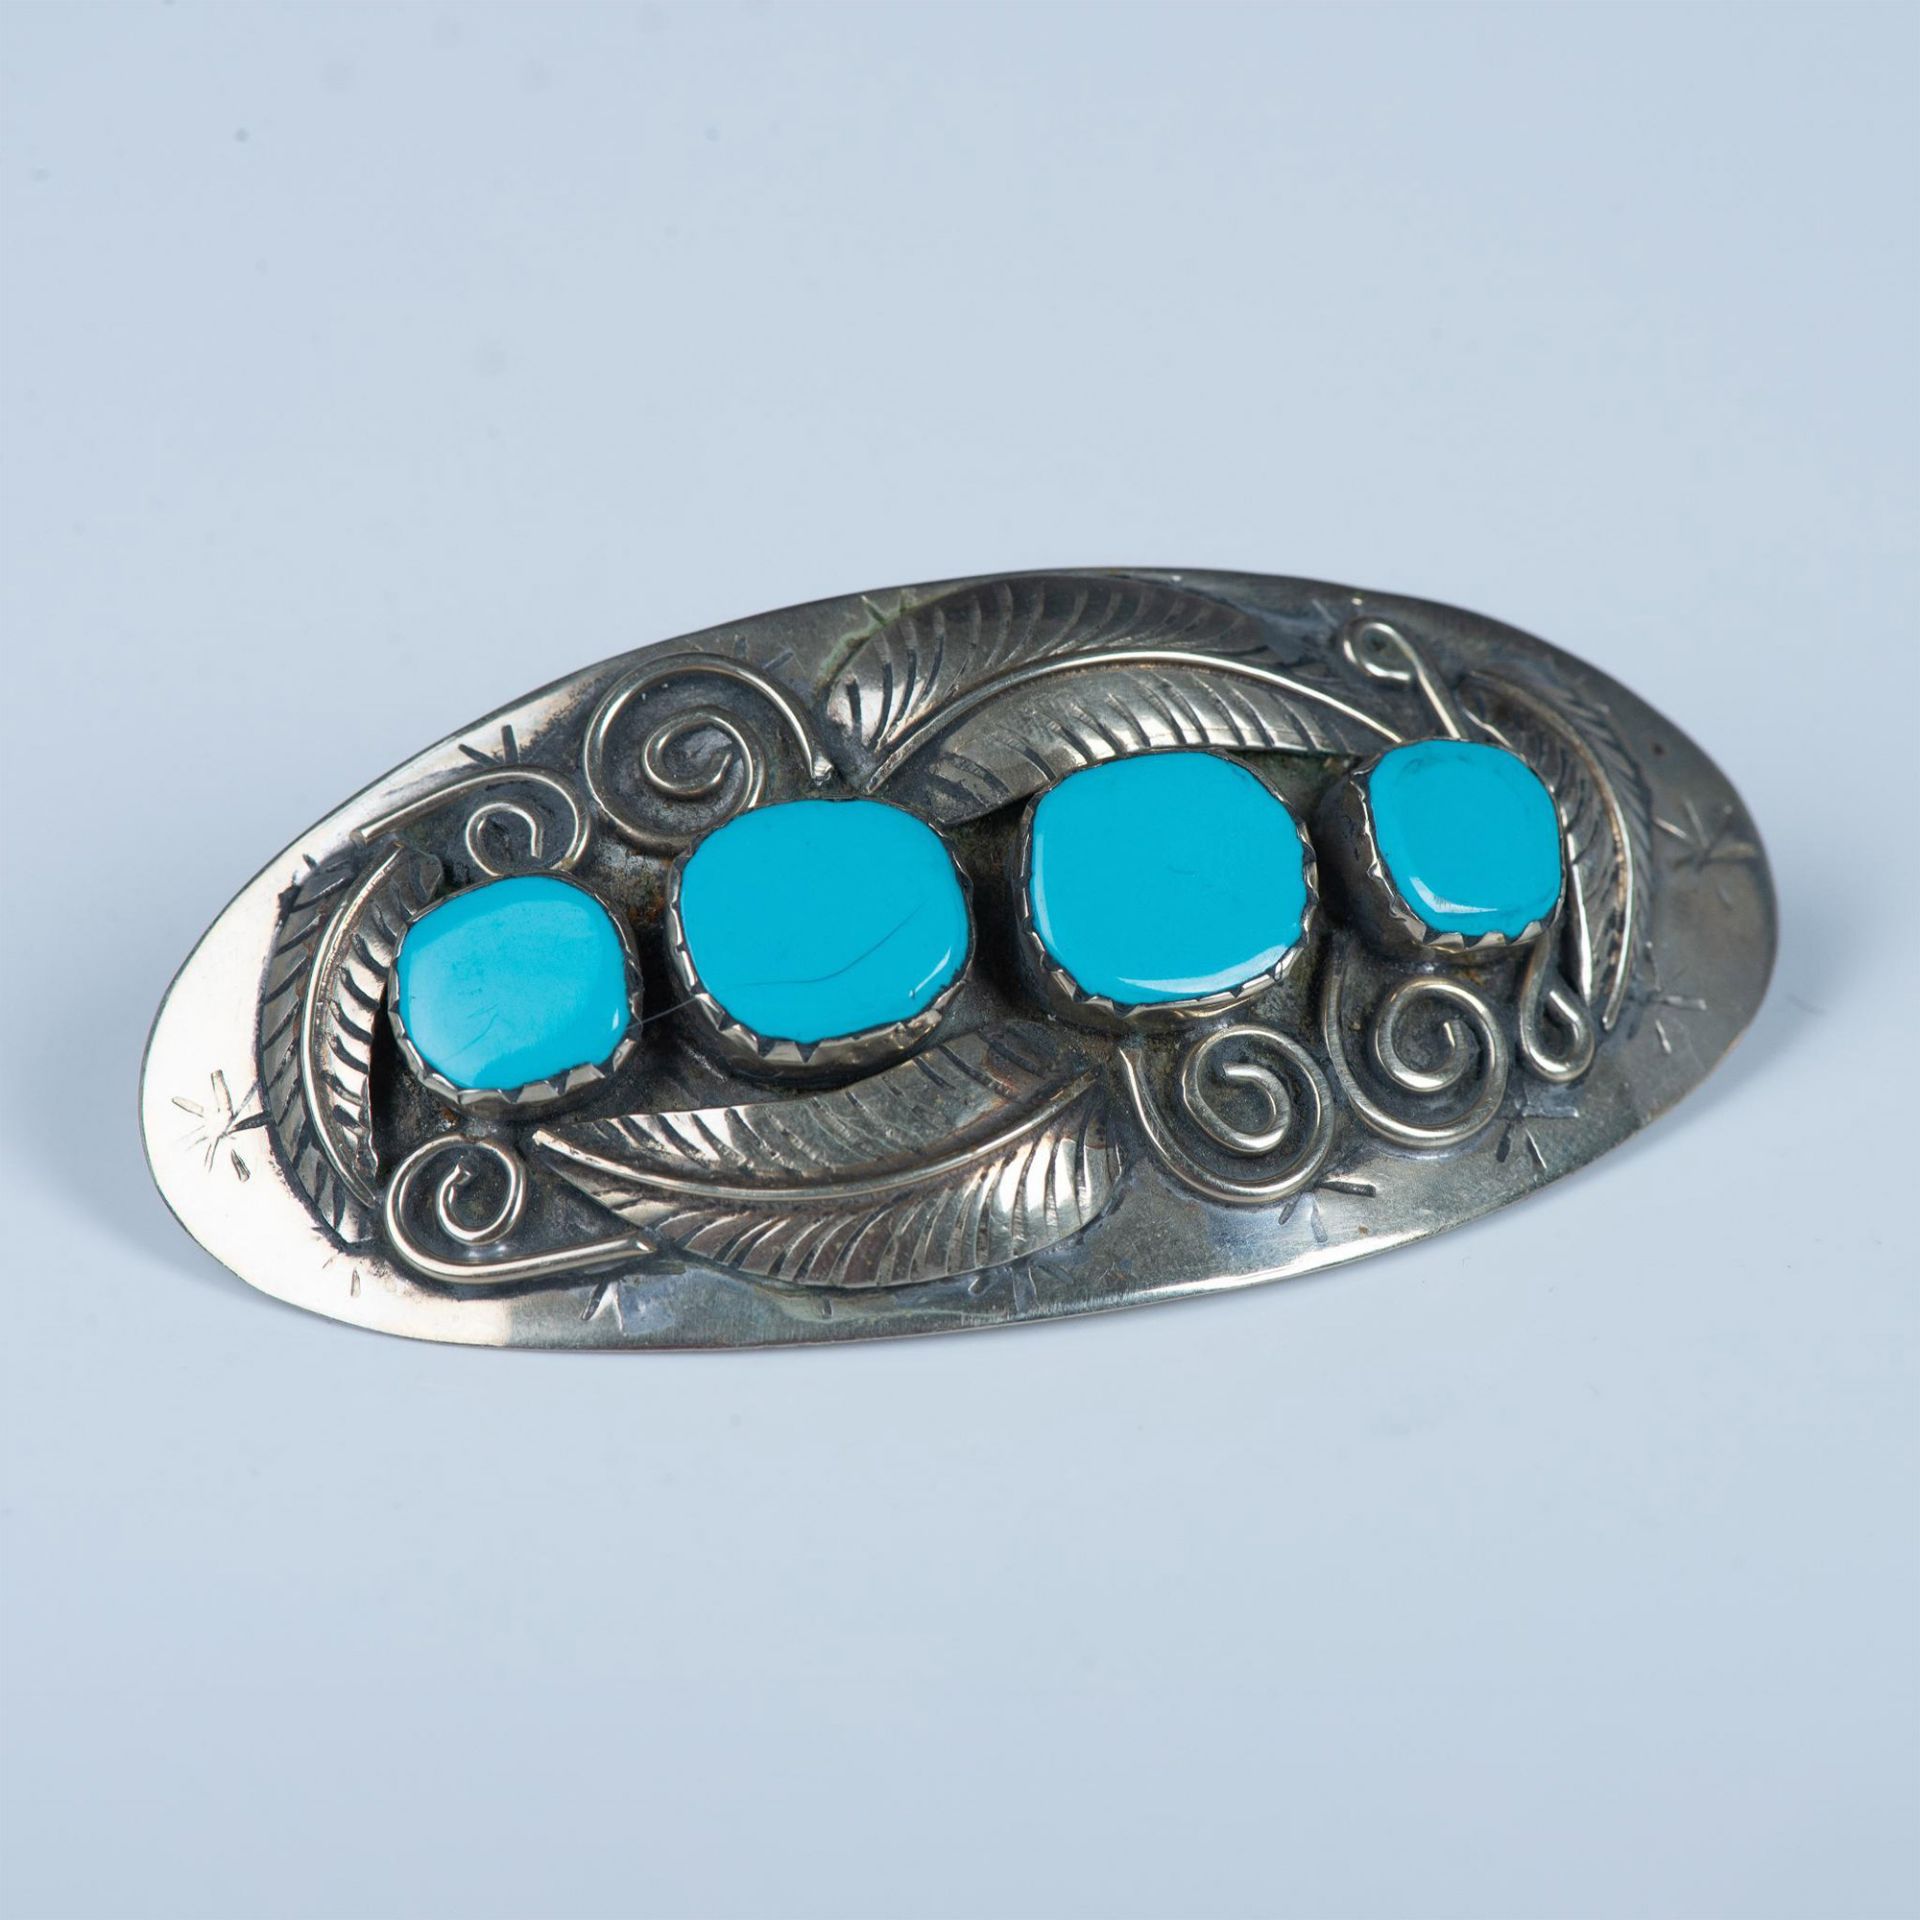 4pc Sterling Silver Hair Barrette & Accessories - Image 3 of 5